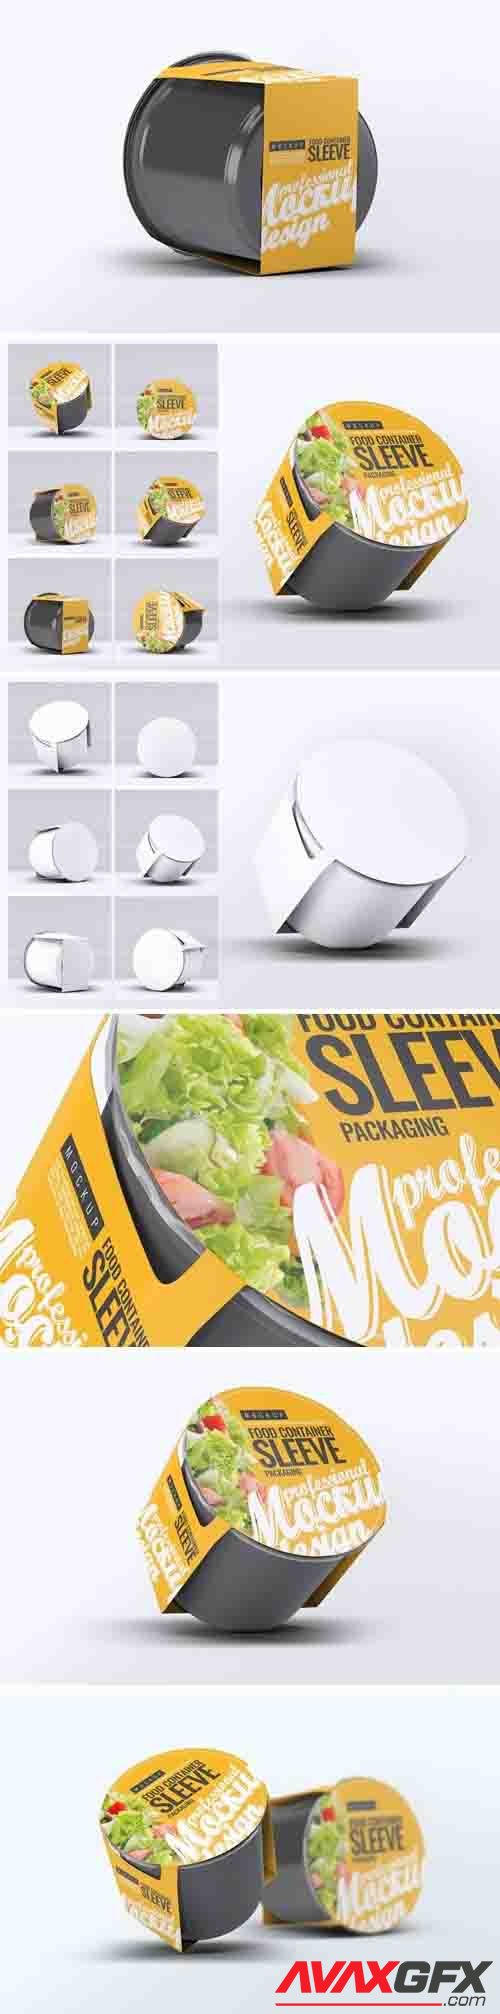 Food Container Sleeve Packaging Mock-Up v.2